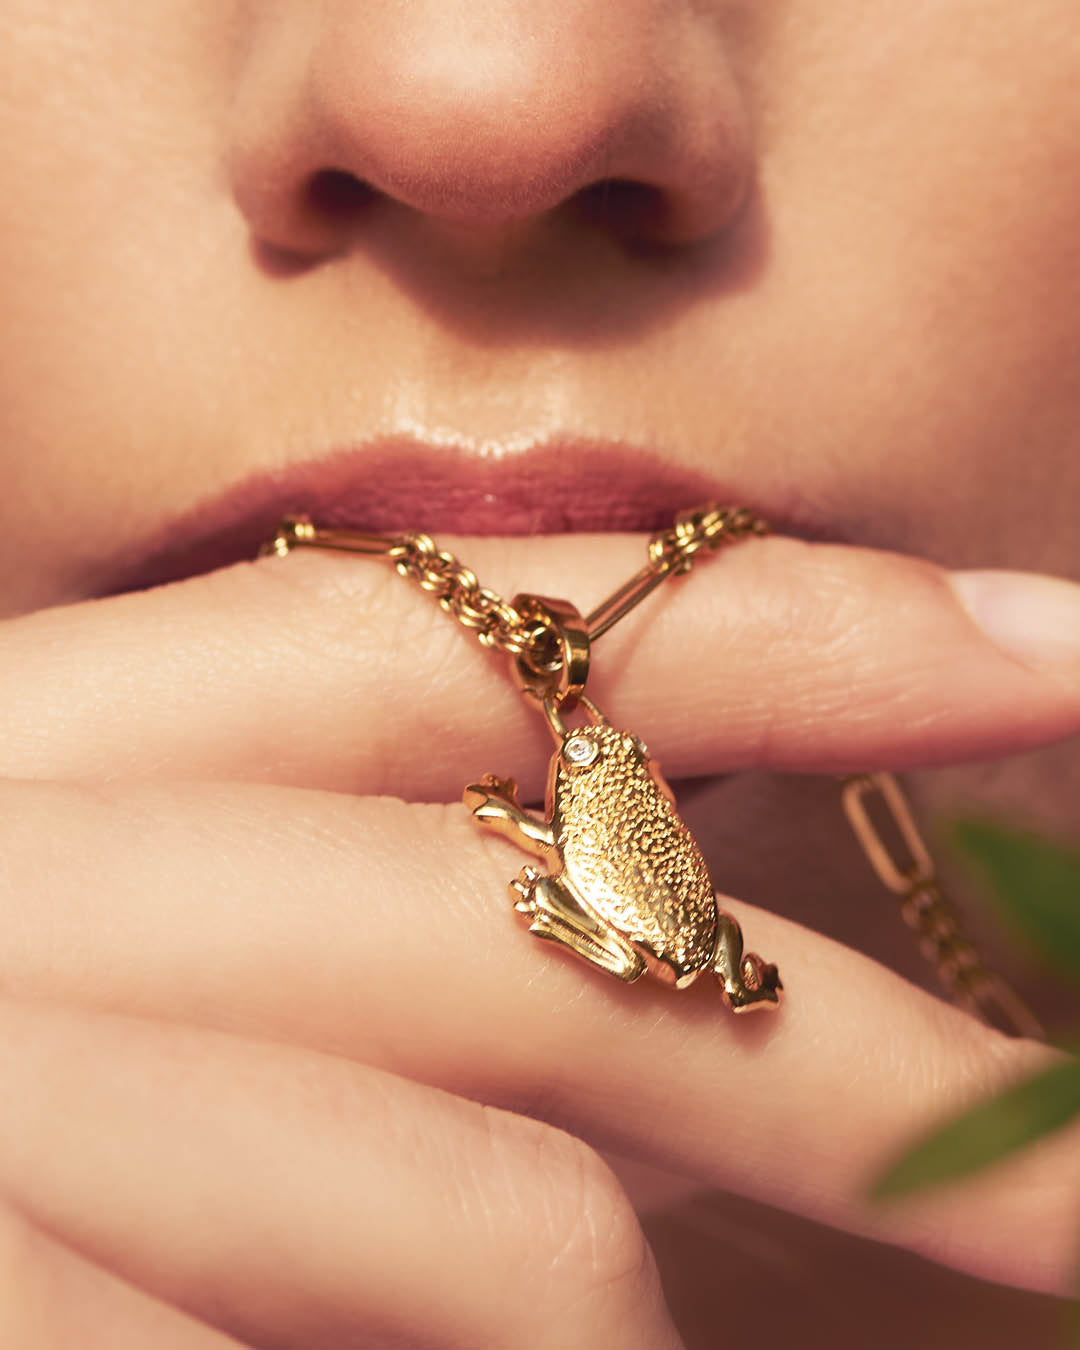 Frog Necklace Pendant in Gold (Yellow/Rose/White)